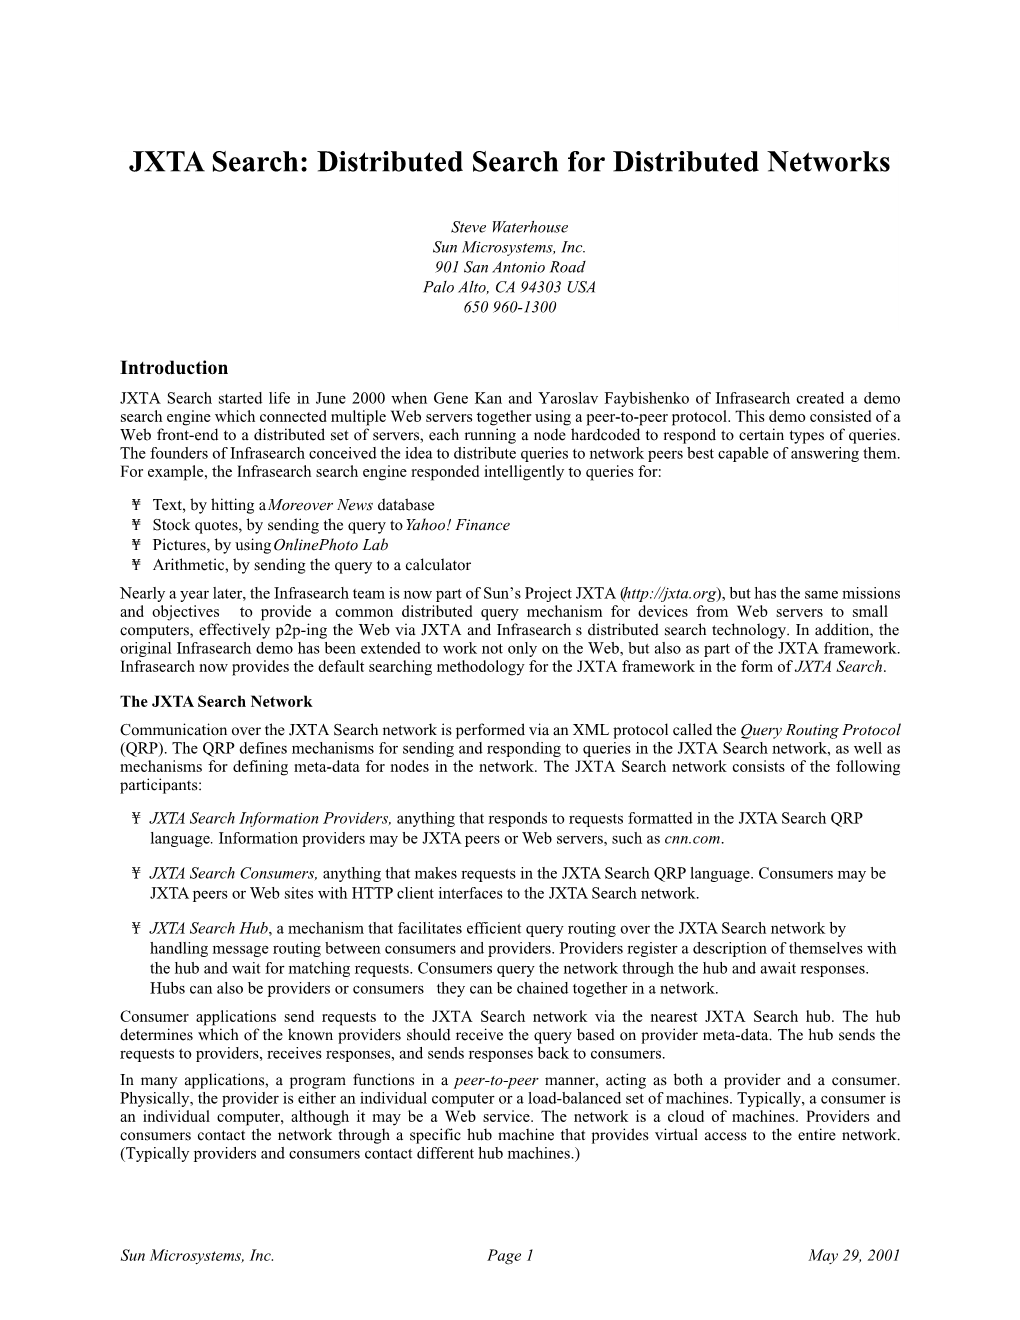 JXTA Search: Distributed Search for Distributed Networks